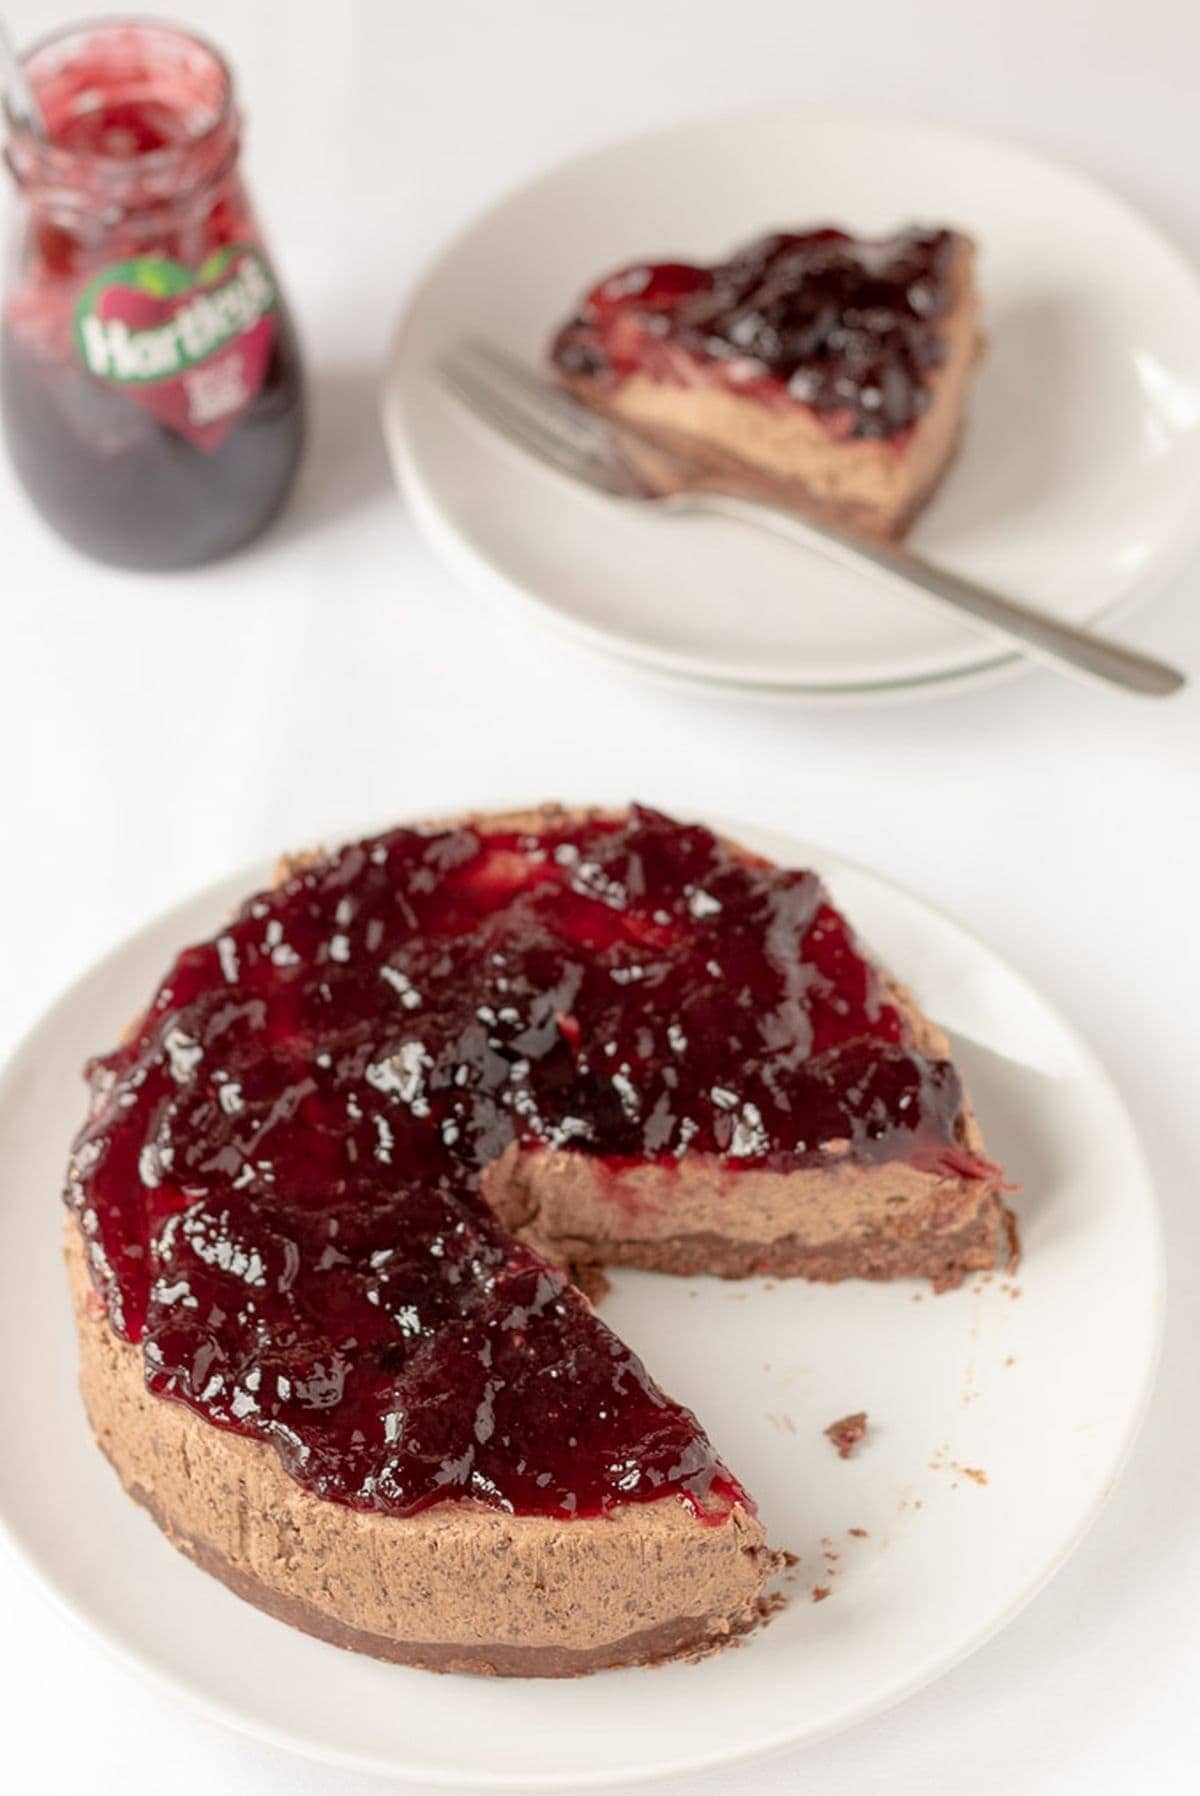 Delicious no-bake black cherry chocolate cheesecake on a plate with a slice taken out of it and placed on a plate to the rear with a serving fork on. A jar of jam to the left side.